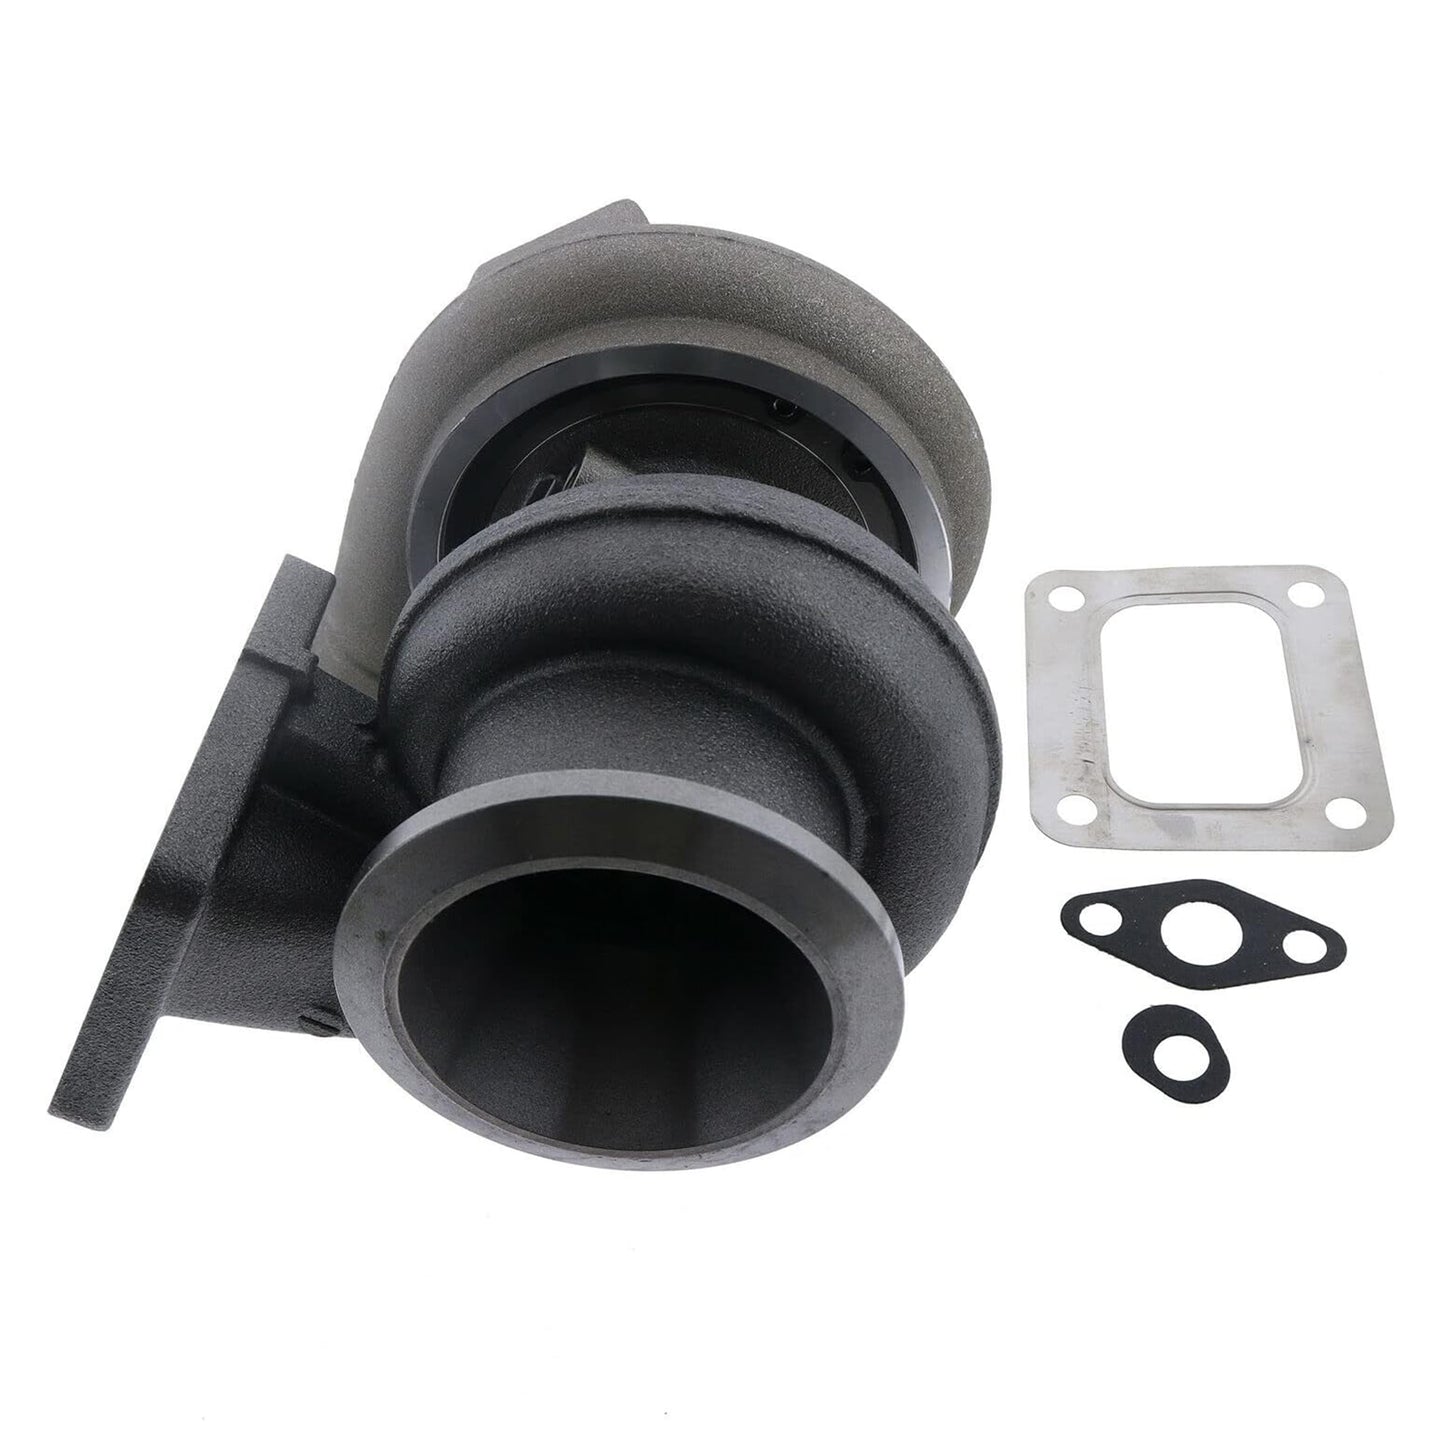 RE528771 Turbocharger Compatible With 2009-12 John Deere PowerTech 4045 Tier 3 Earth Mover